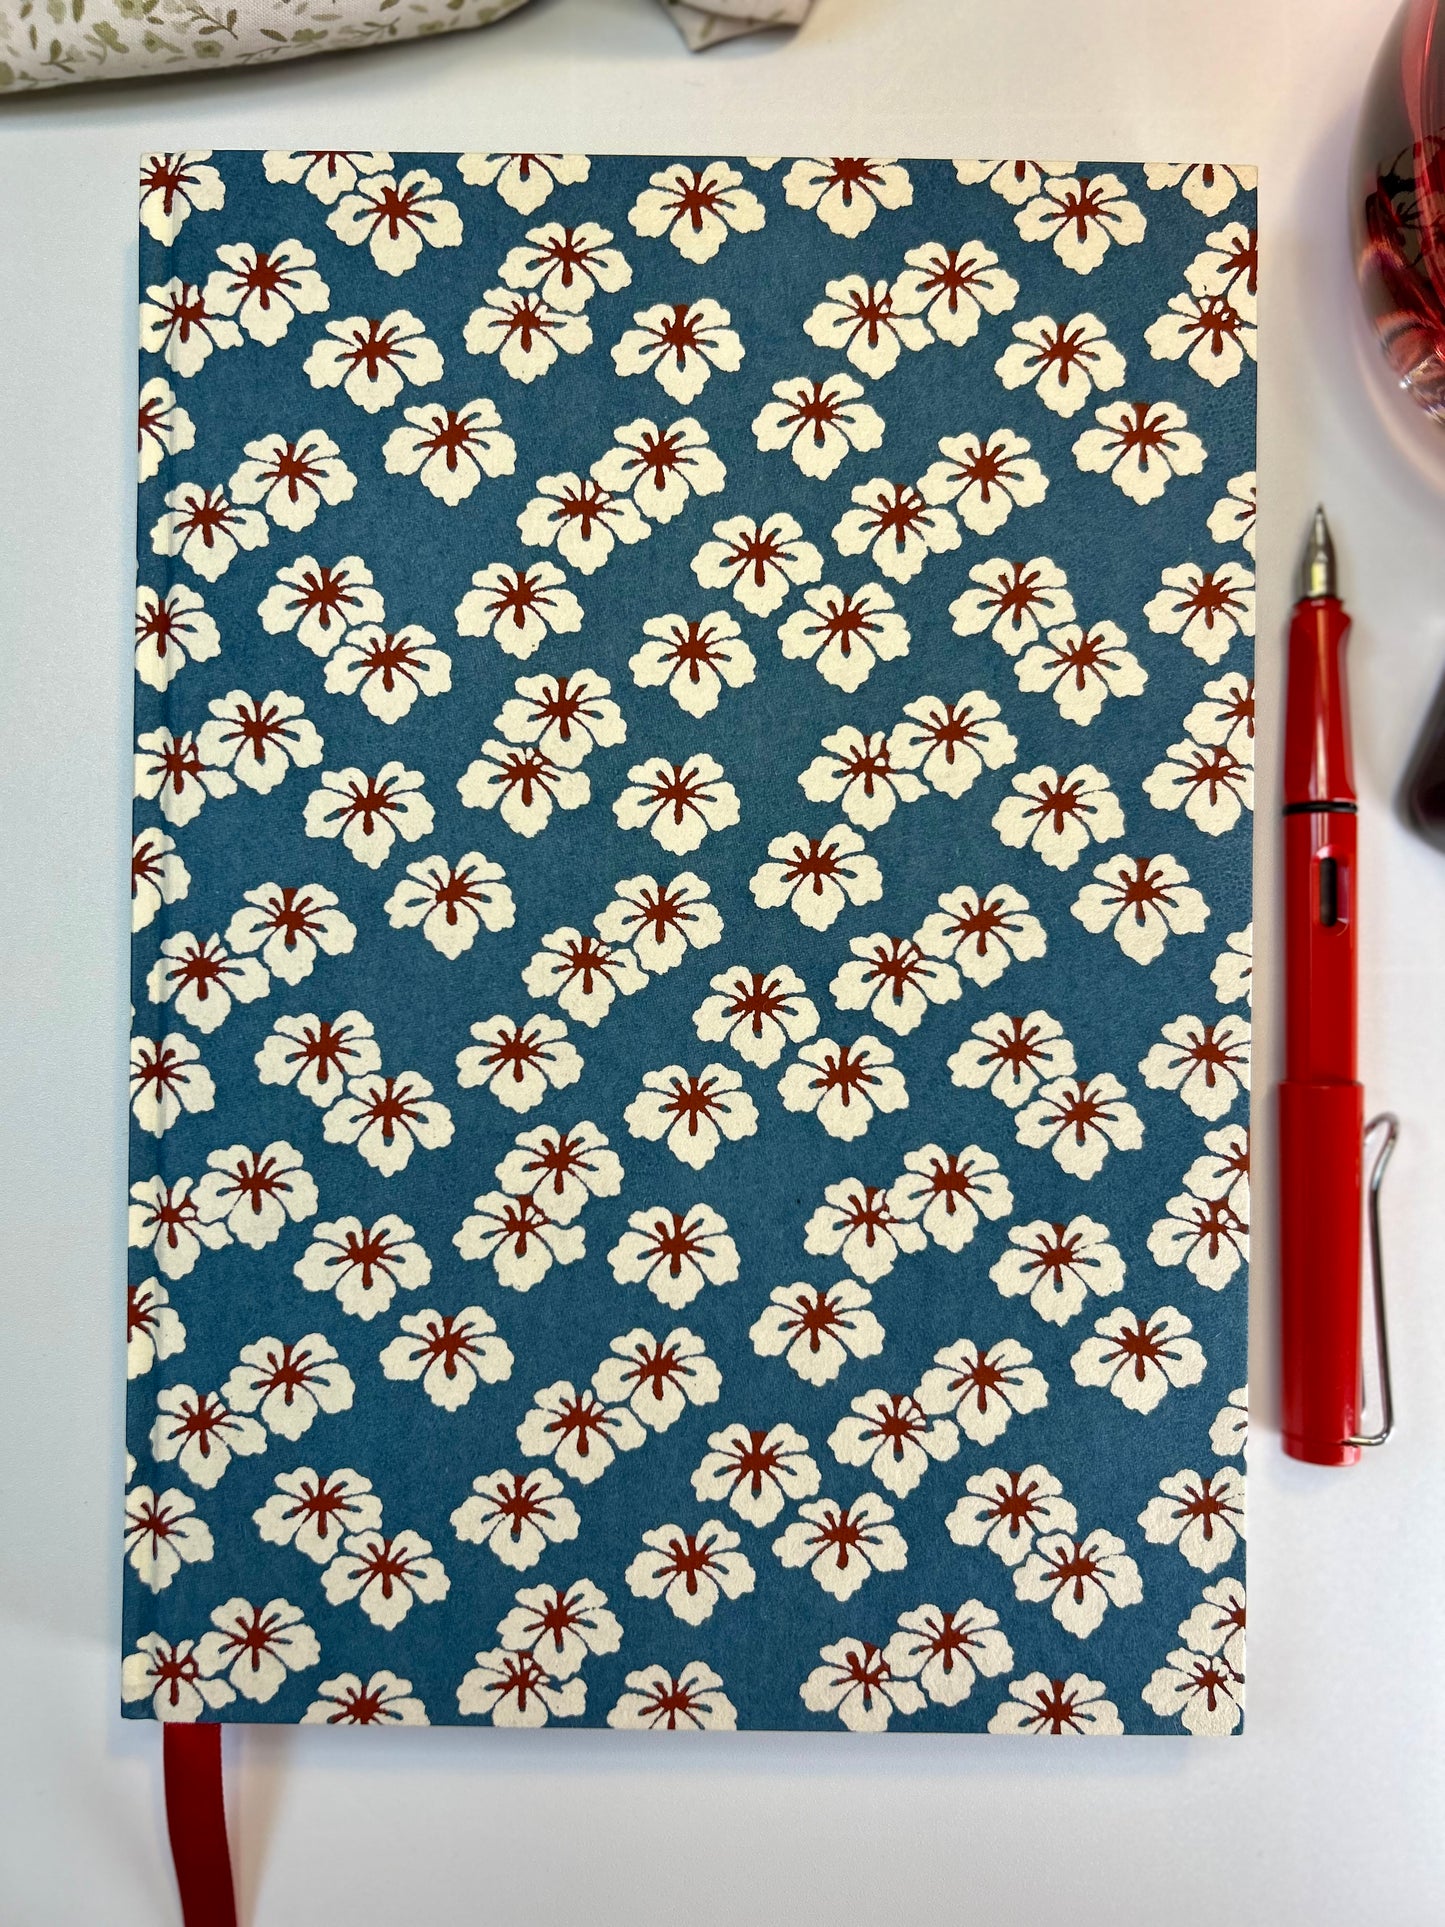 Katazome-shi Blue with White Blossoms, Handcrafted B5 Hardcover Notebook